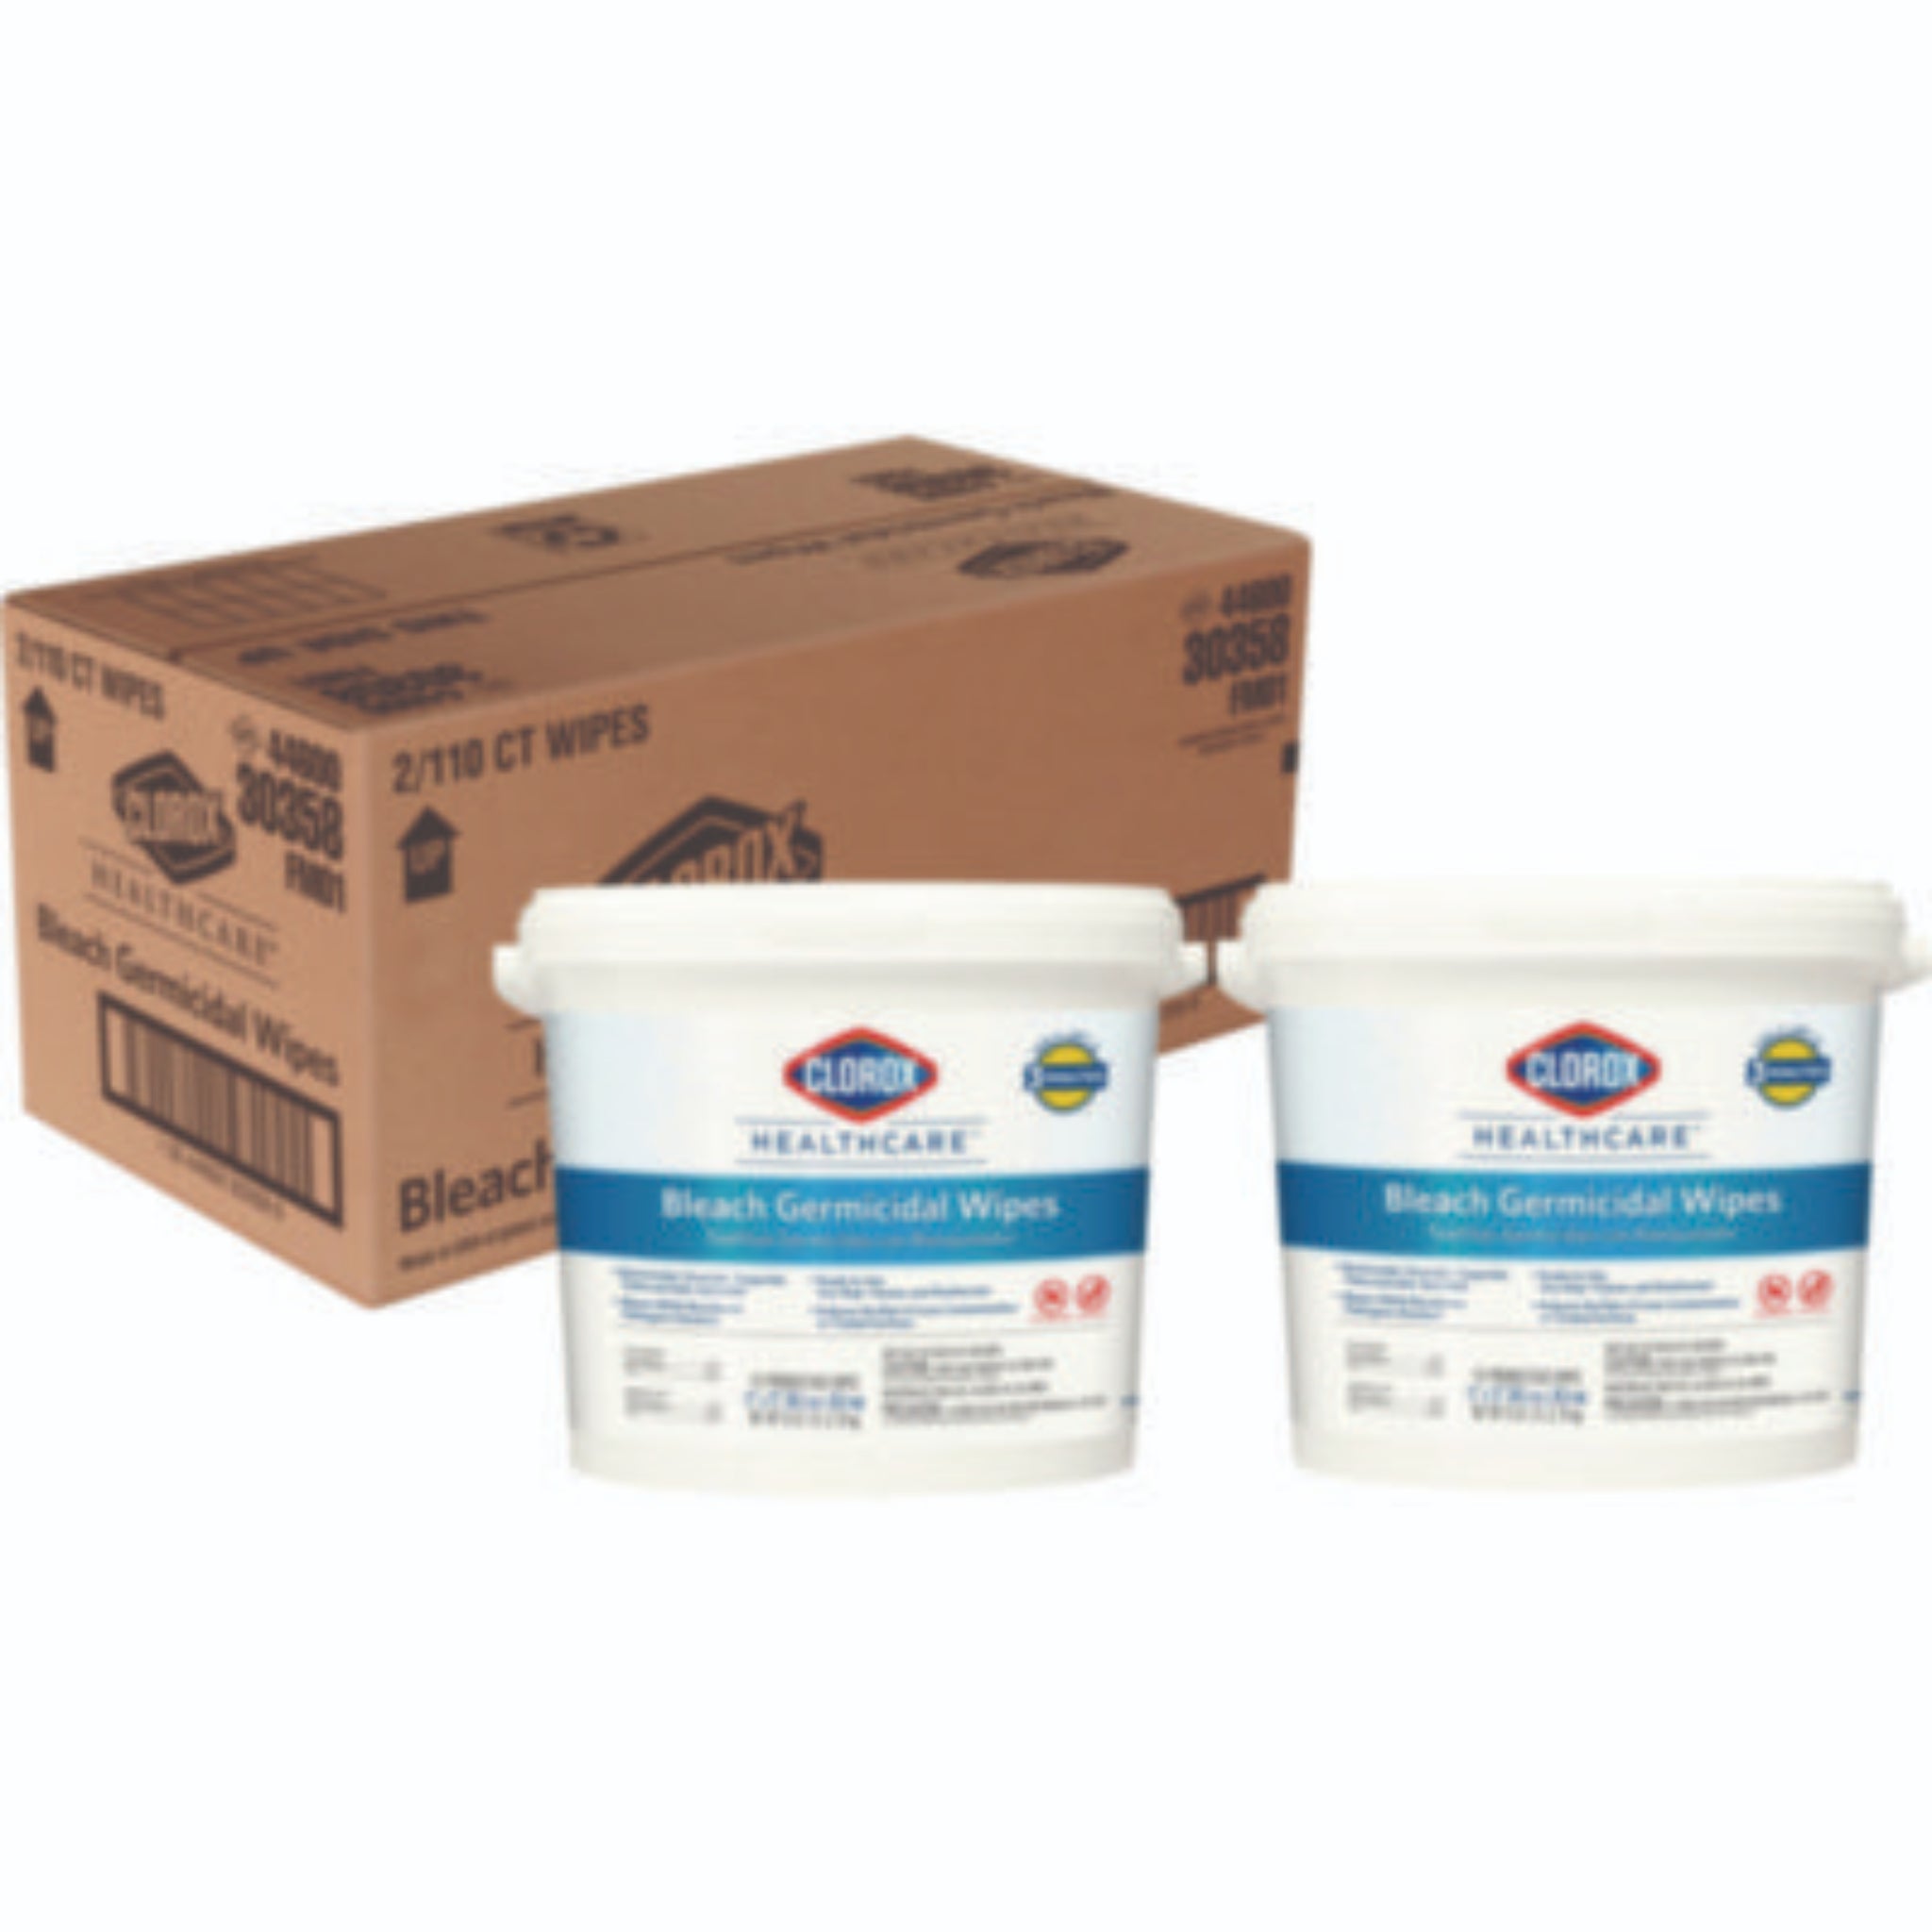 CLOROX SALES CO. CLO30358CT Bleach Germicidal Wipes, Carton of 2 Canisters